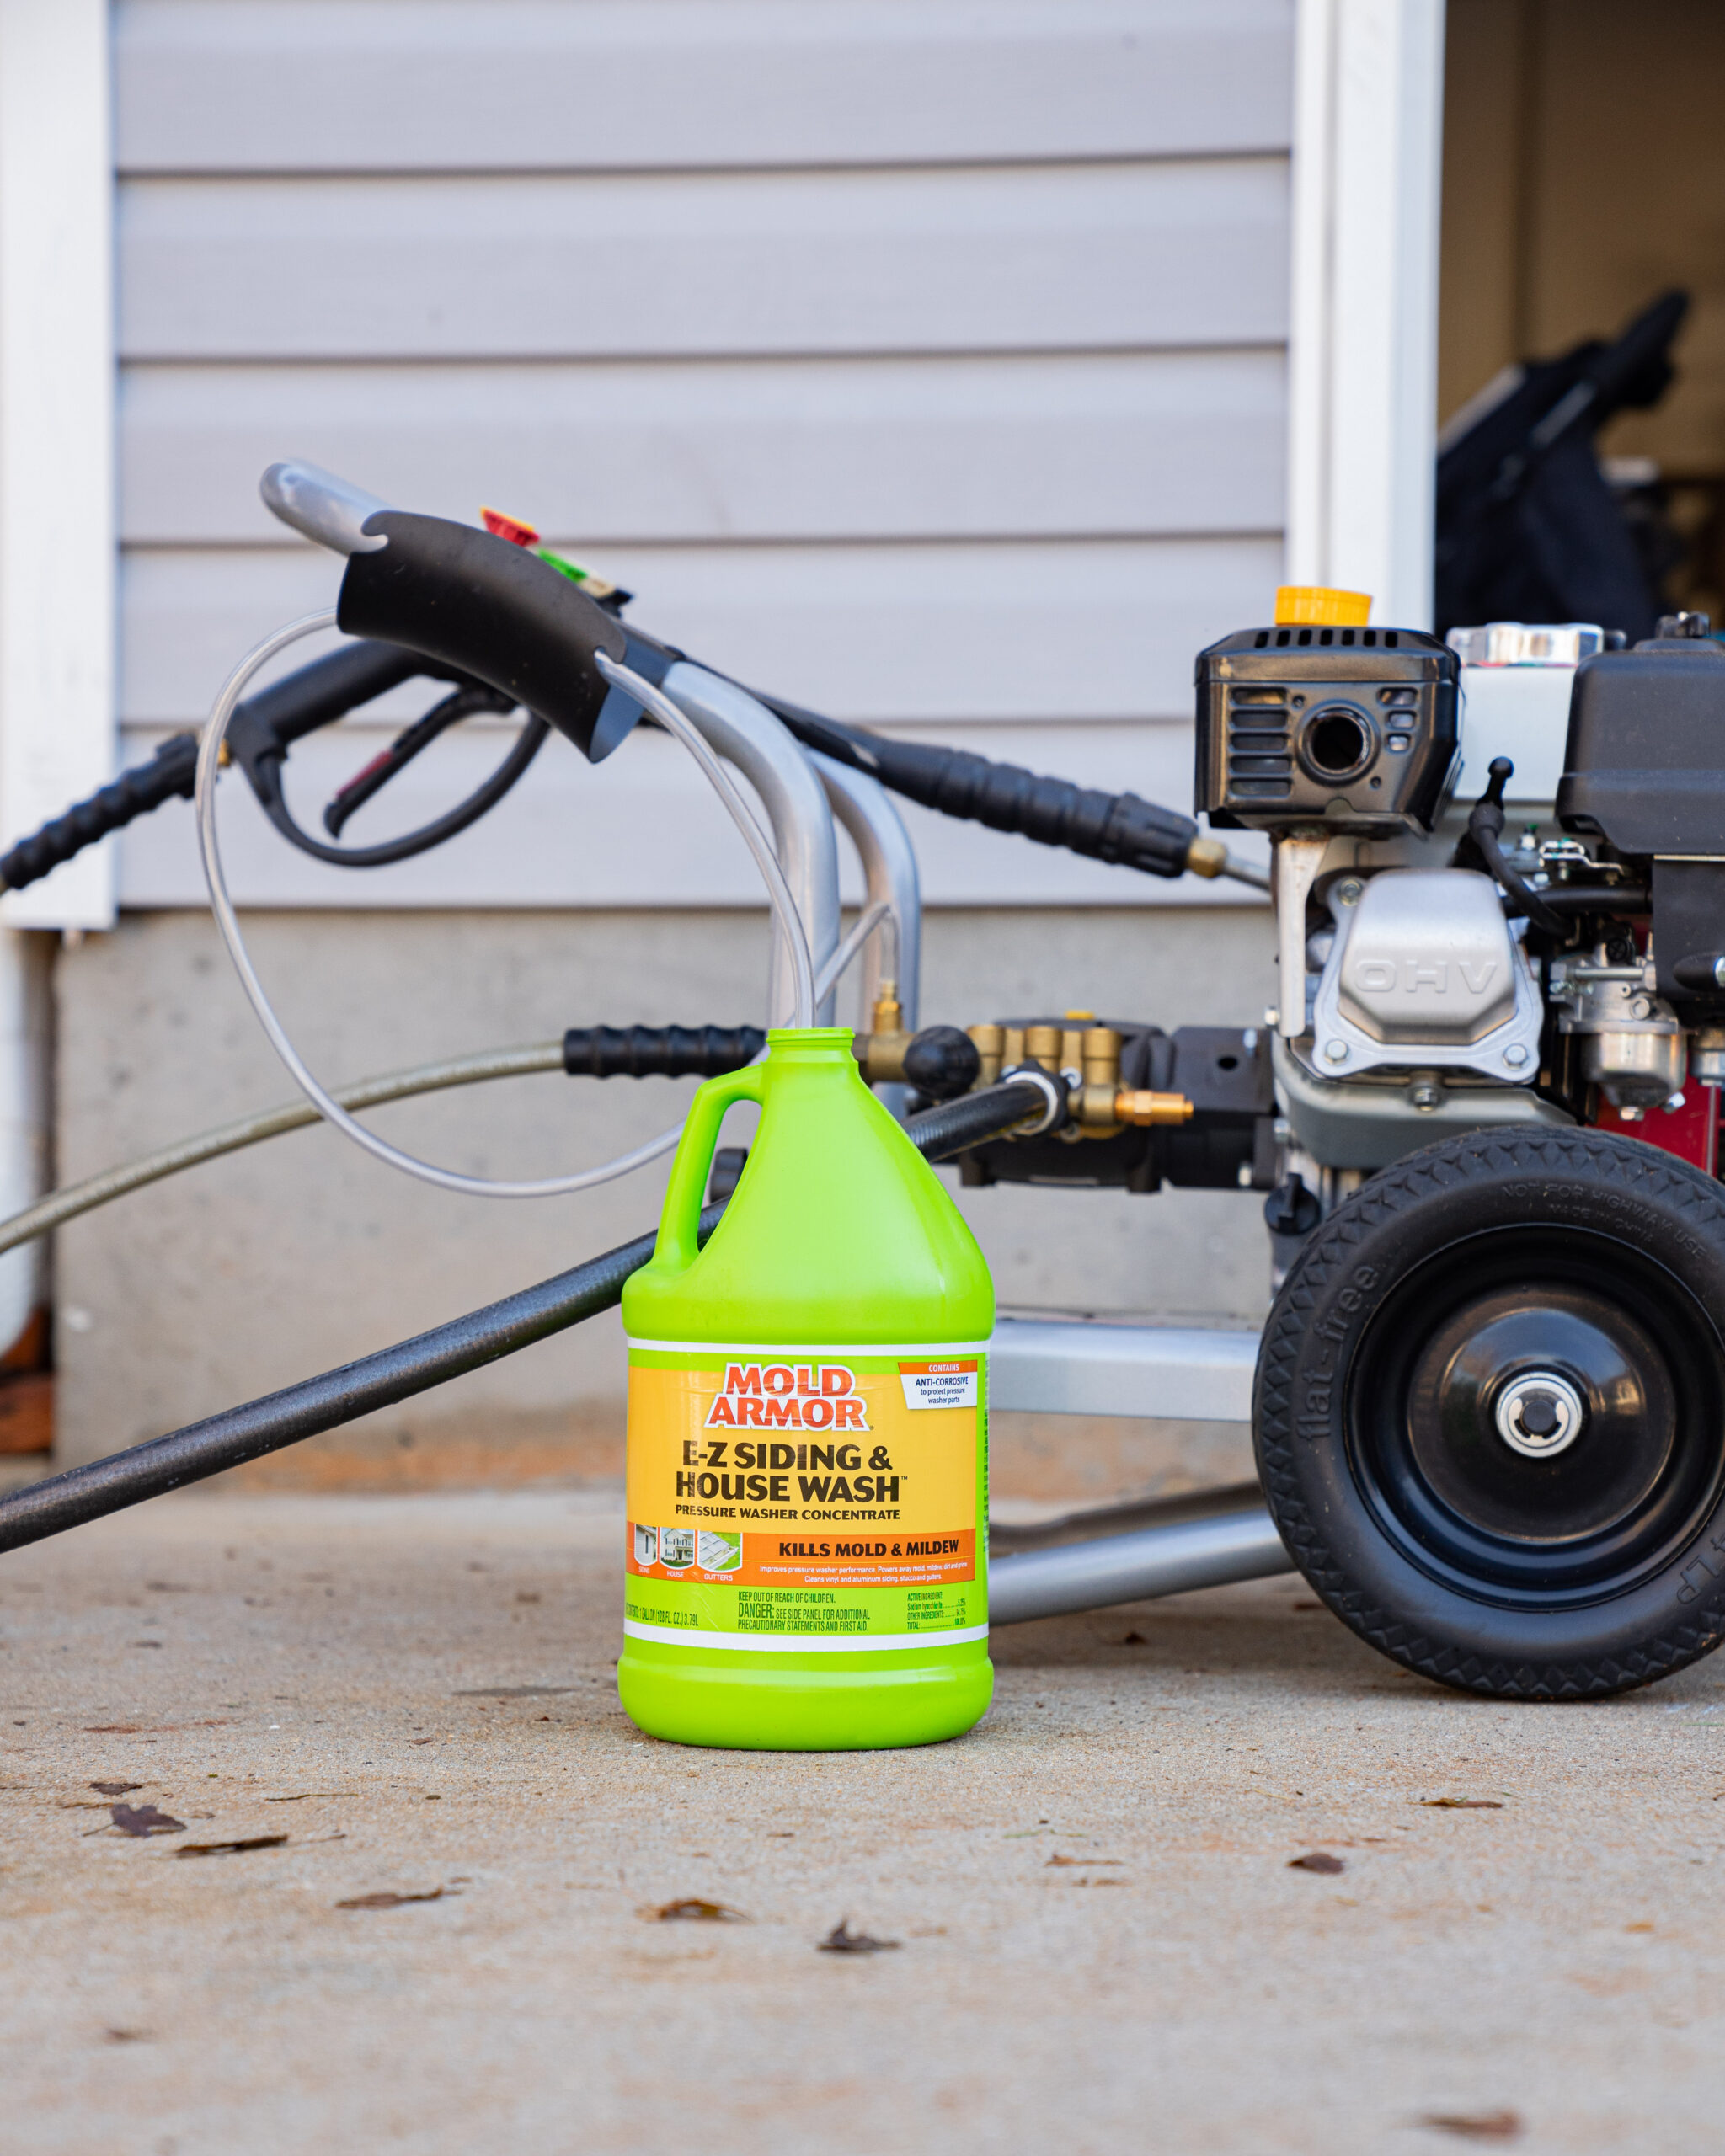 How To Wash Your Car Using a GARDEN PUMP SPRAYER In 10 Minutes